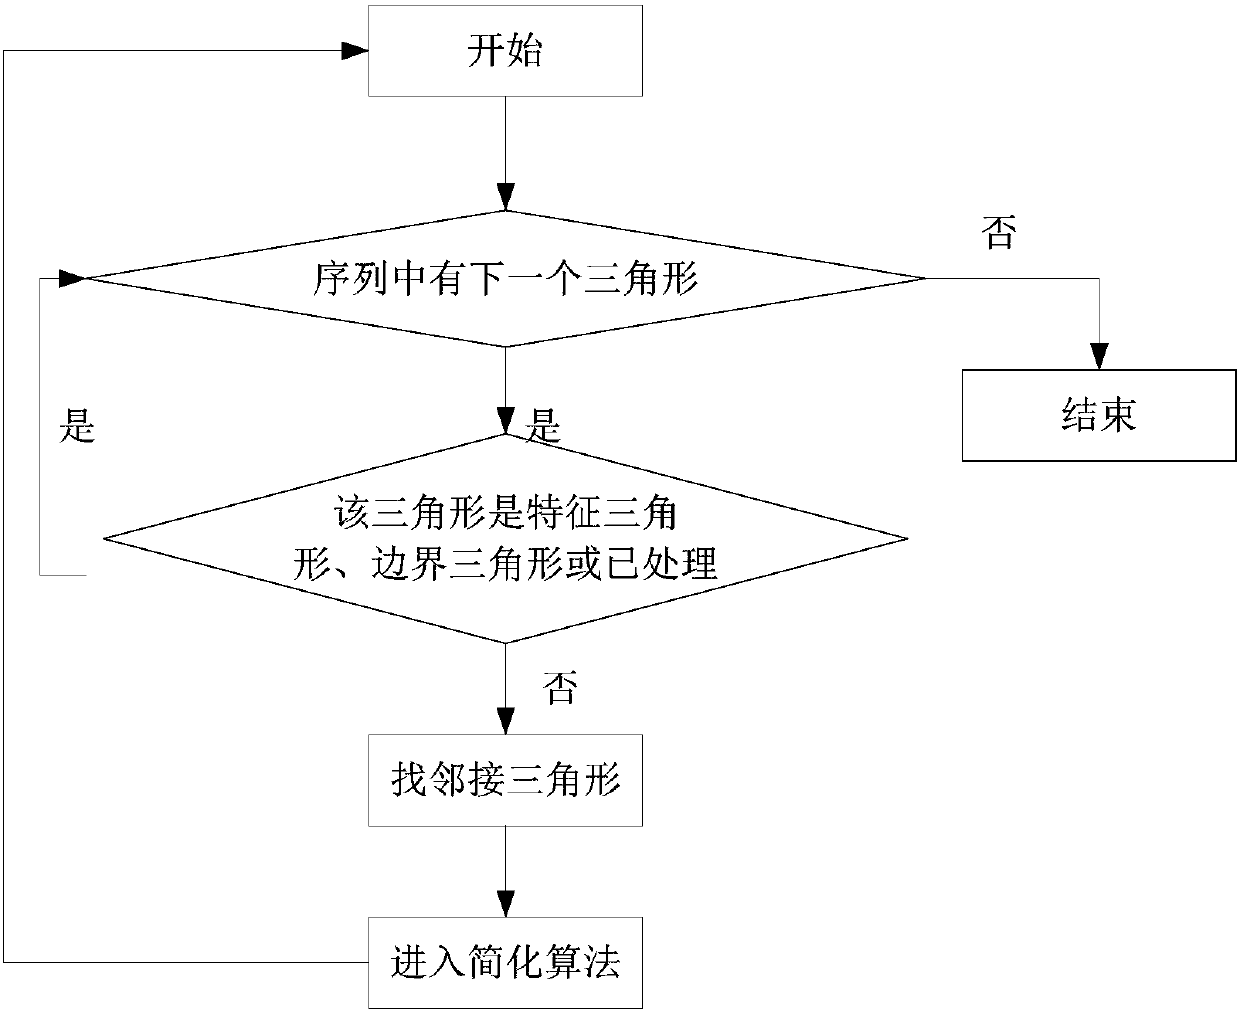 Aerial image three-dimensional modeling method and related product